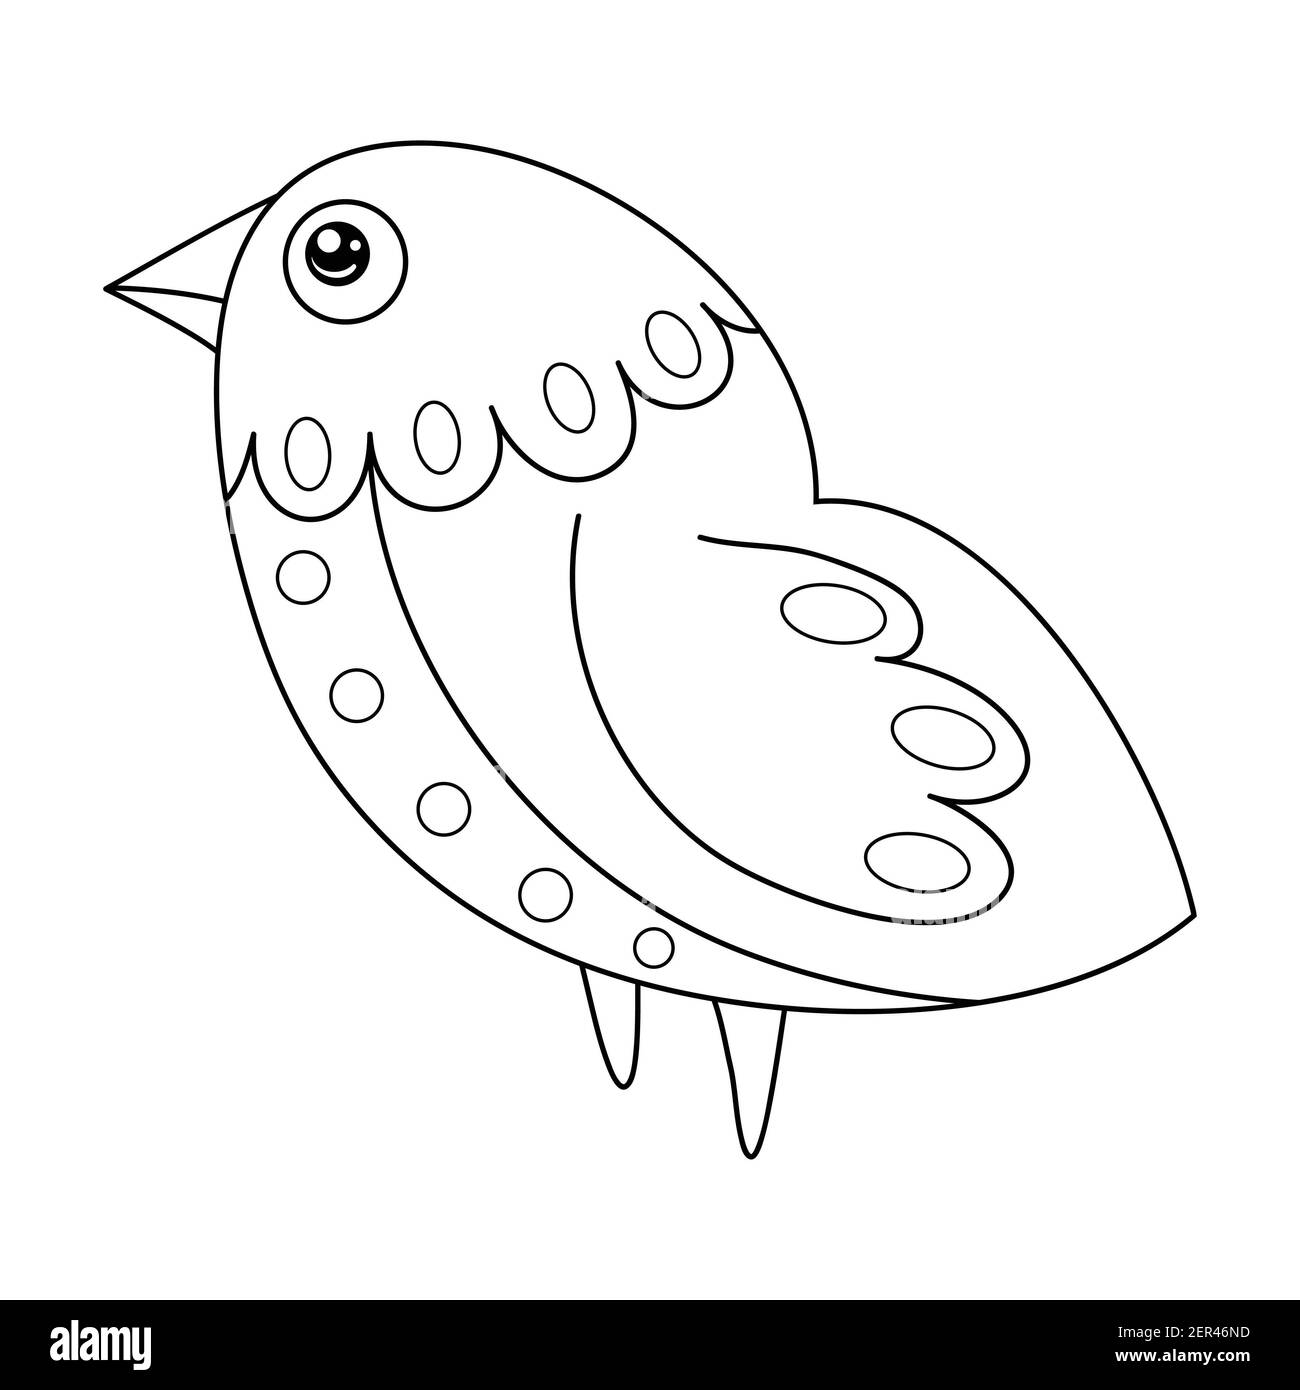 A cute cartoon bird image for relaxing activity.Line art style illustration for print. Stock Photo